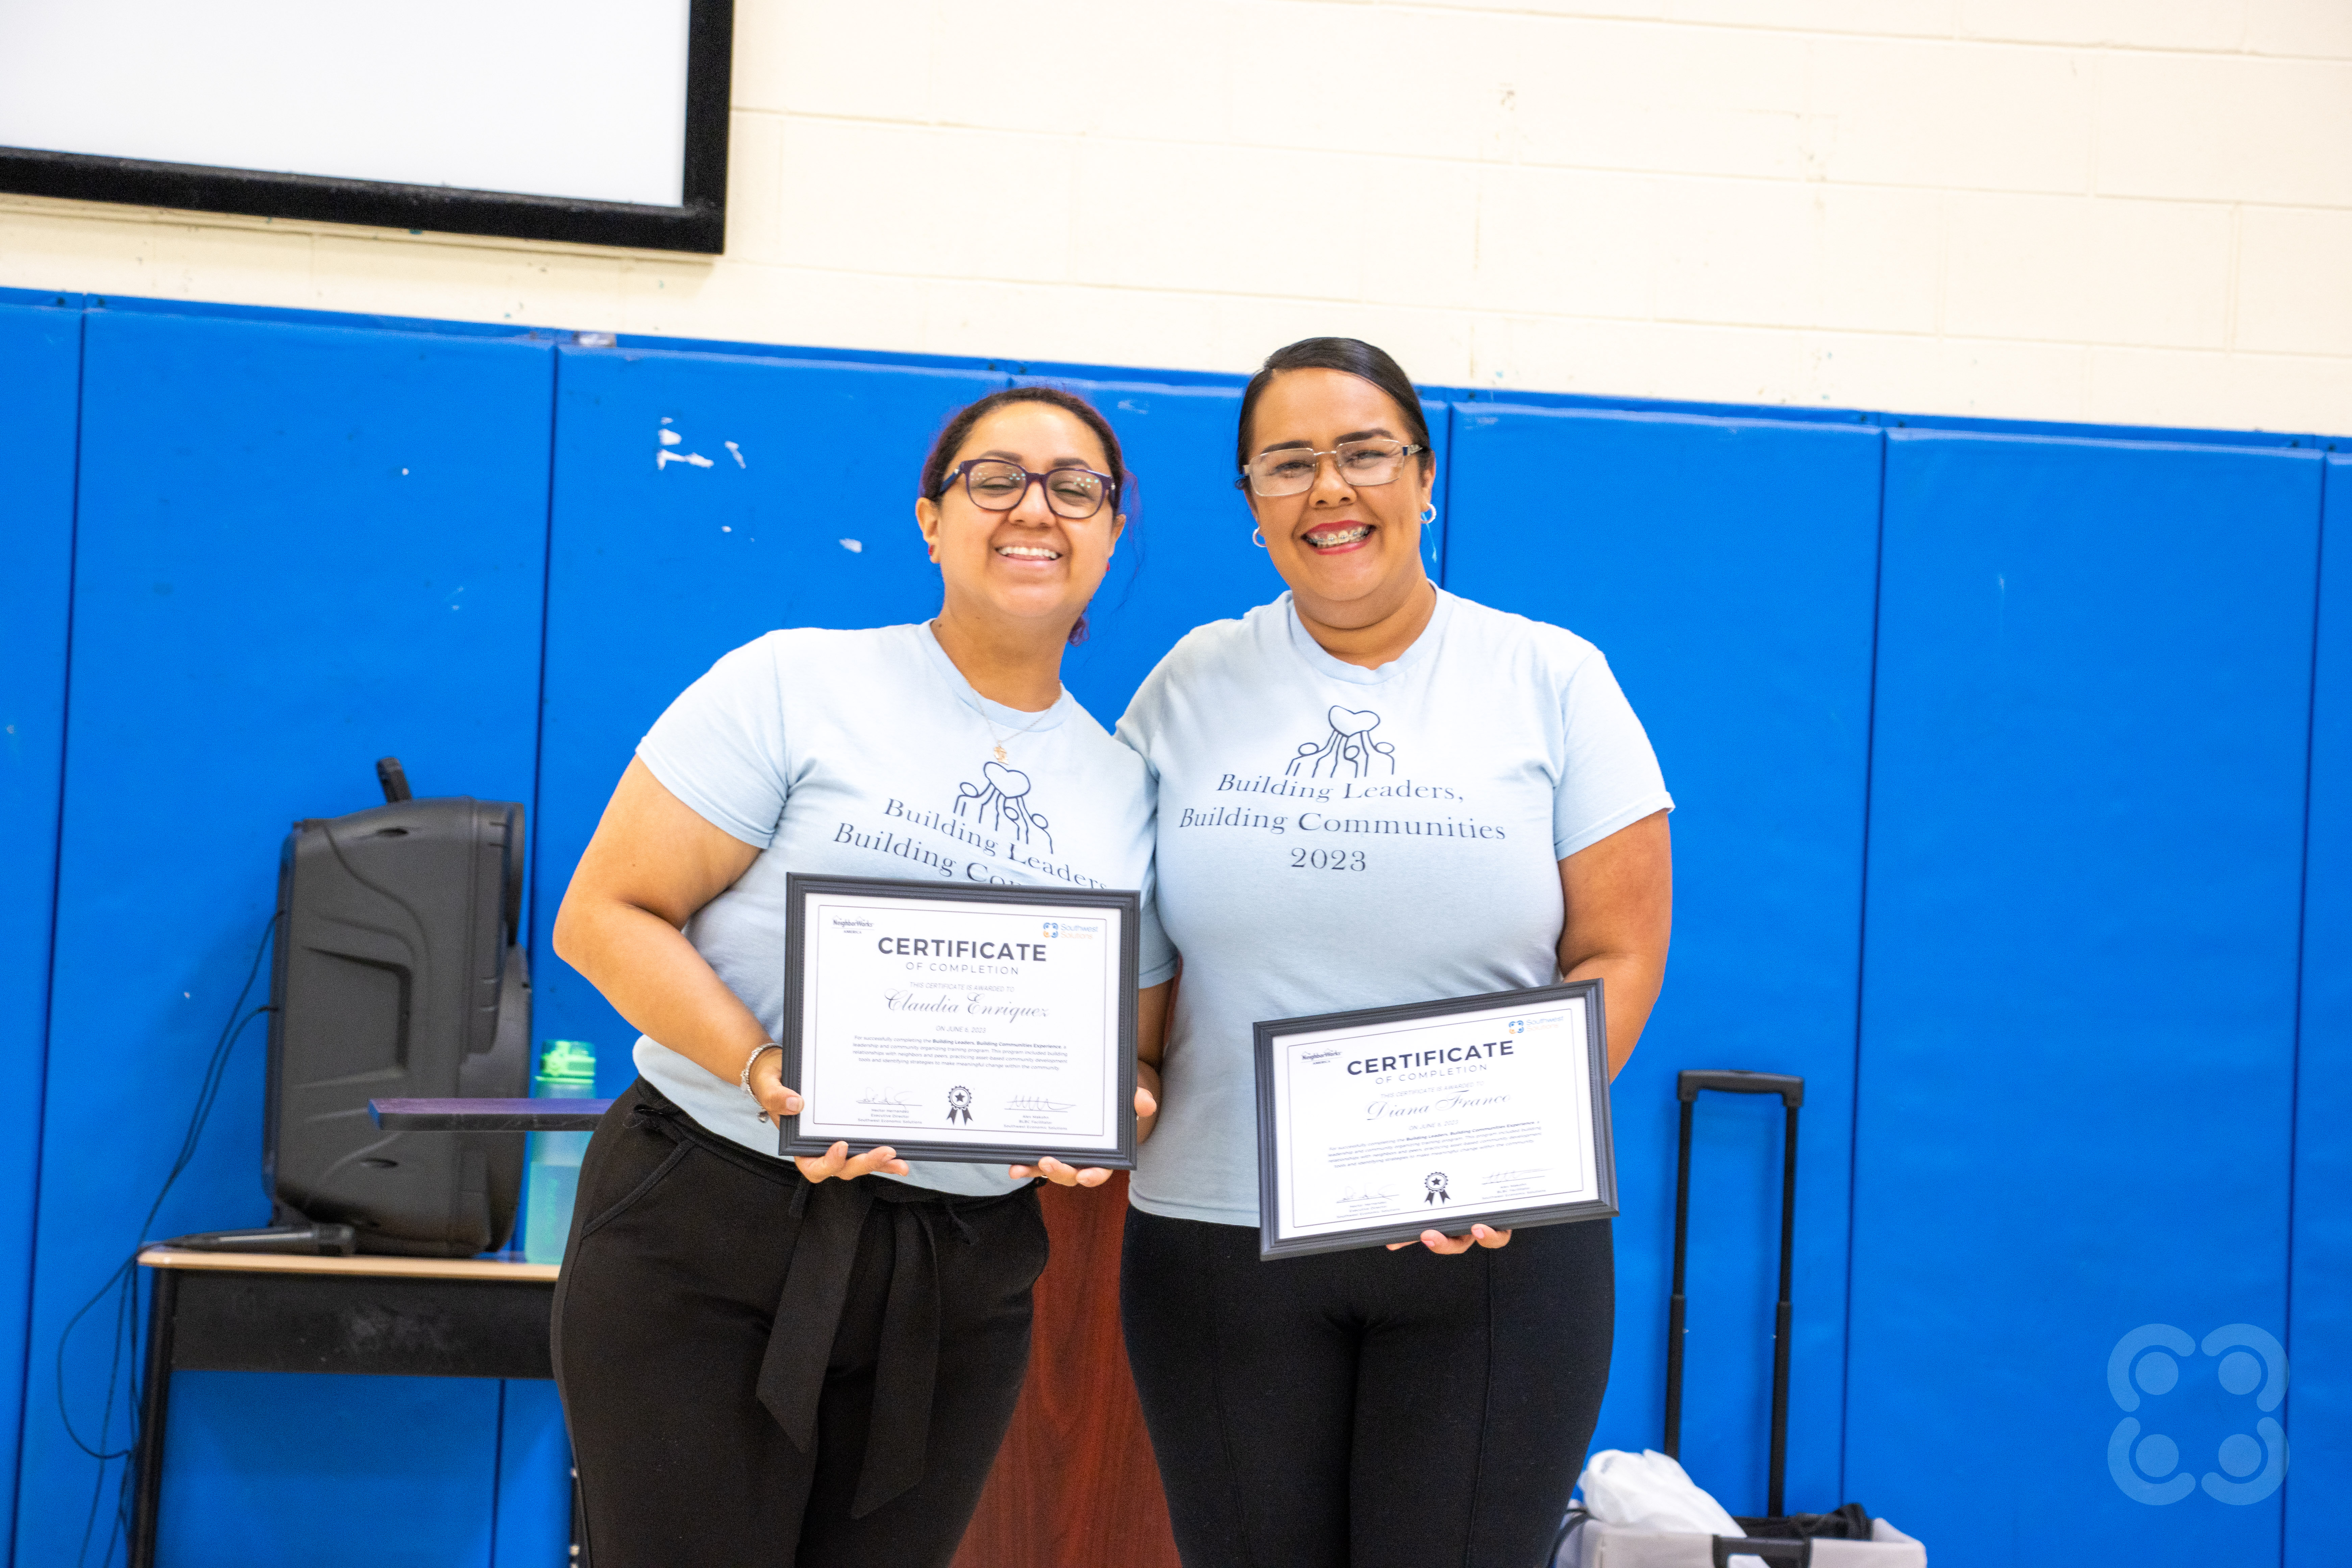 Claudia and Diana holding their certification of completion of the Building Leaders, Building Communities program